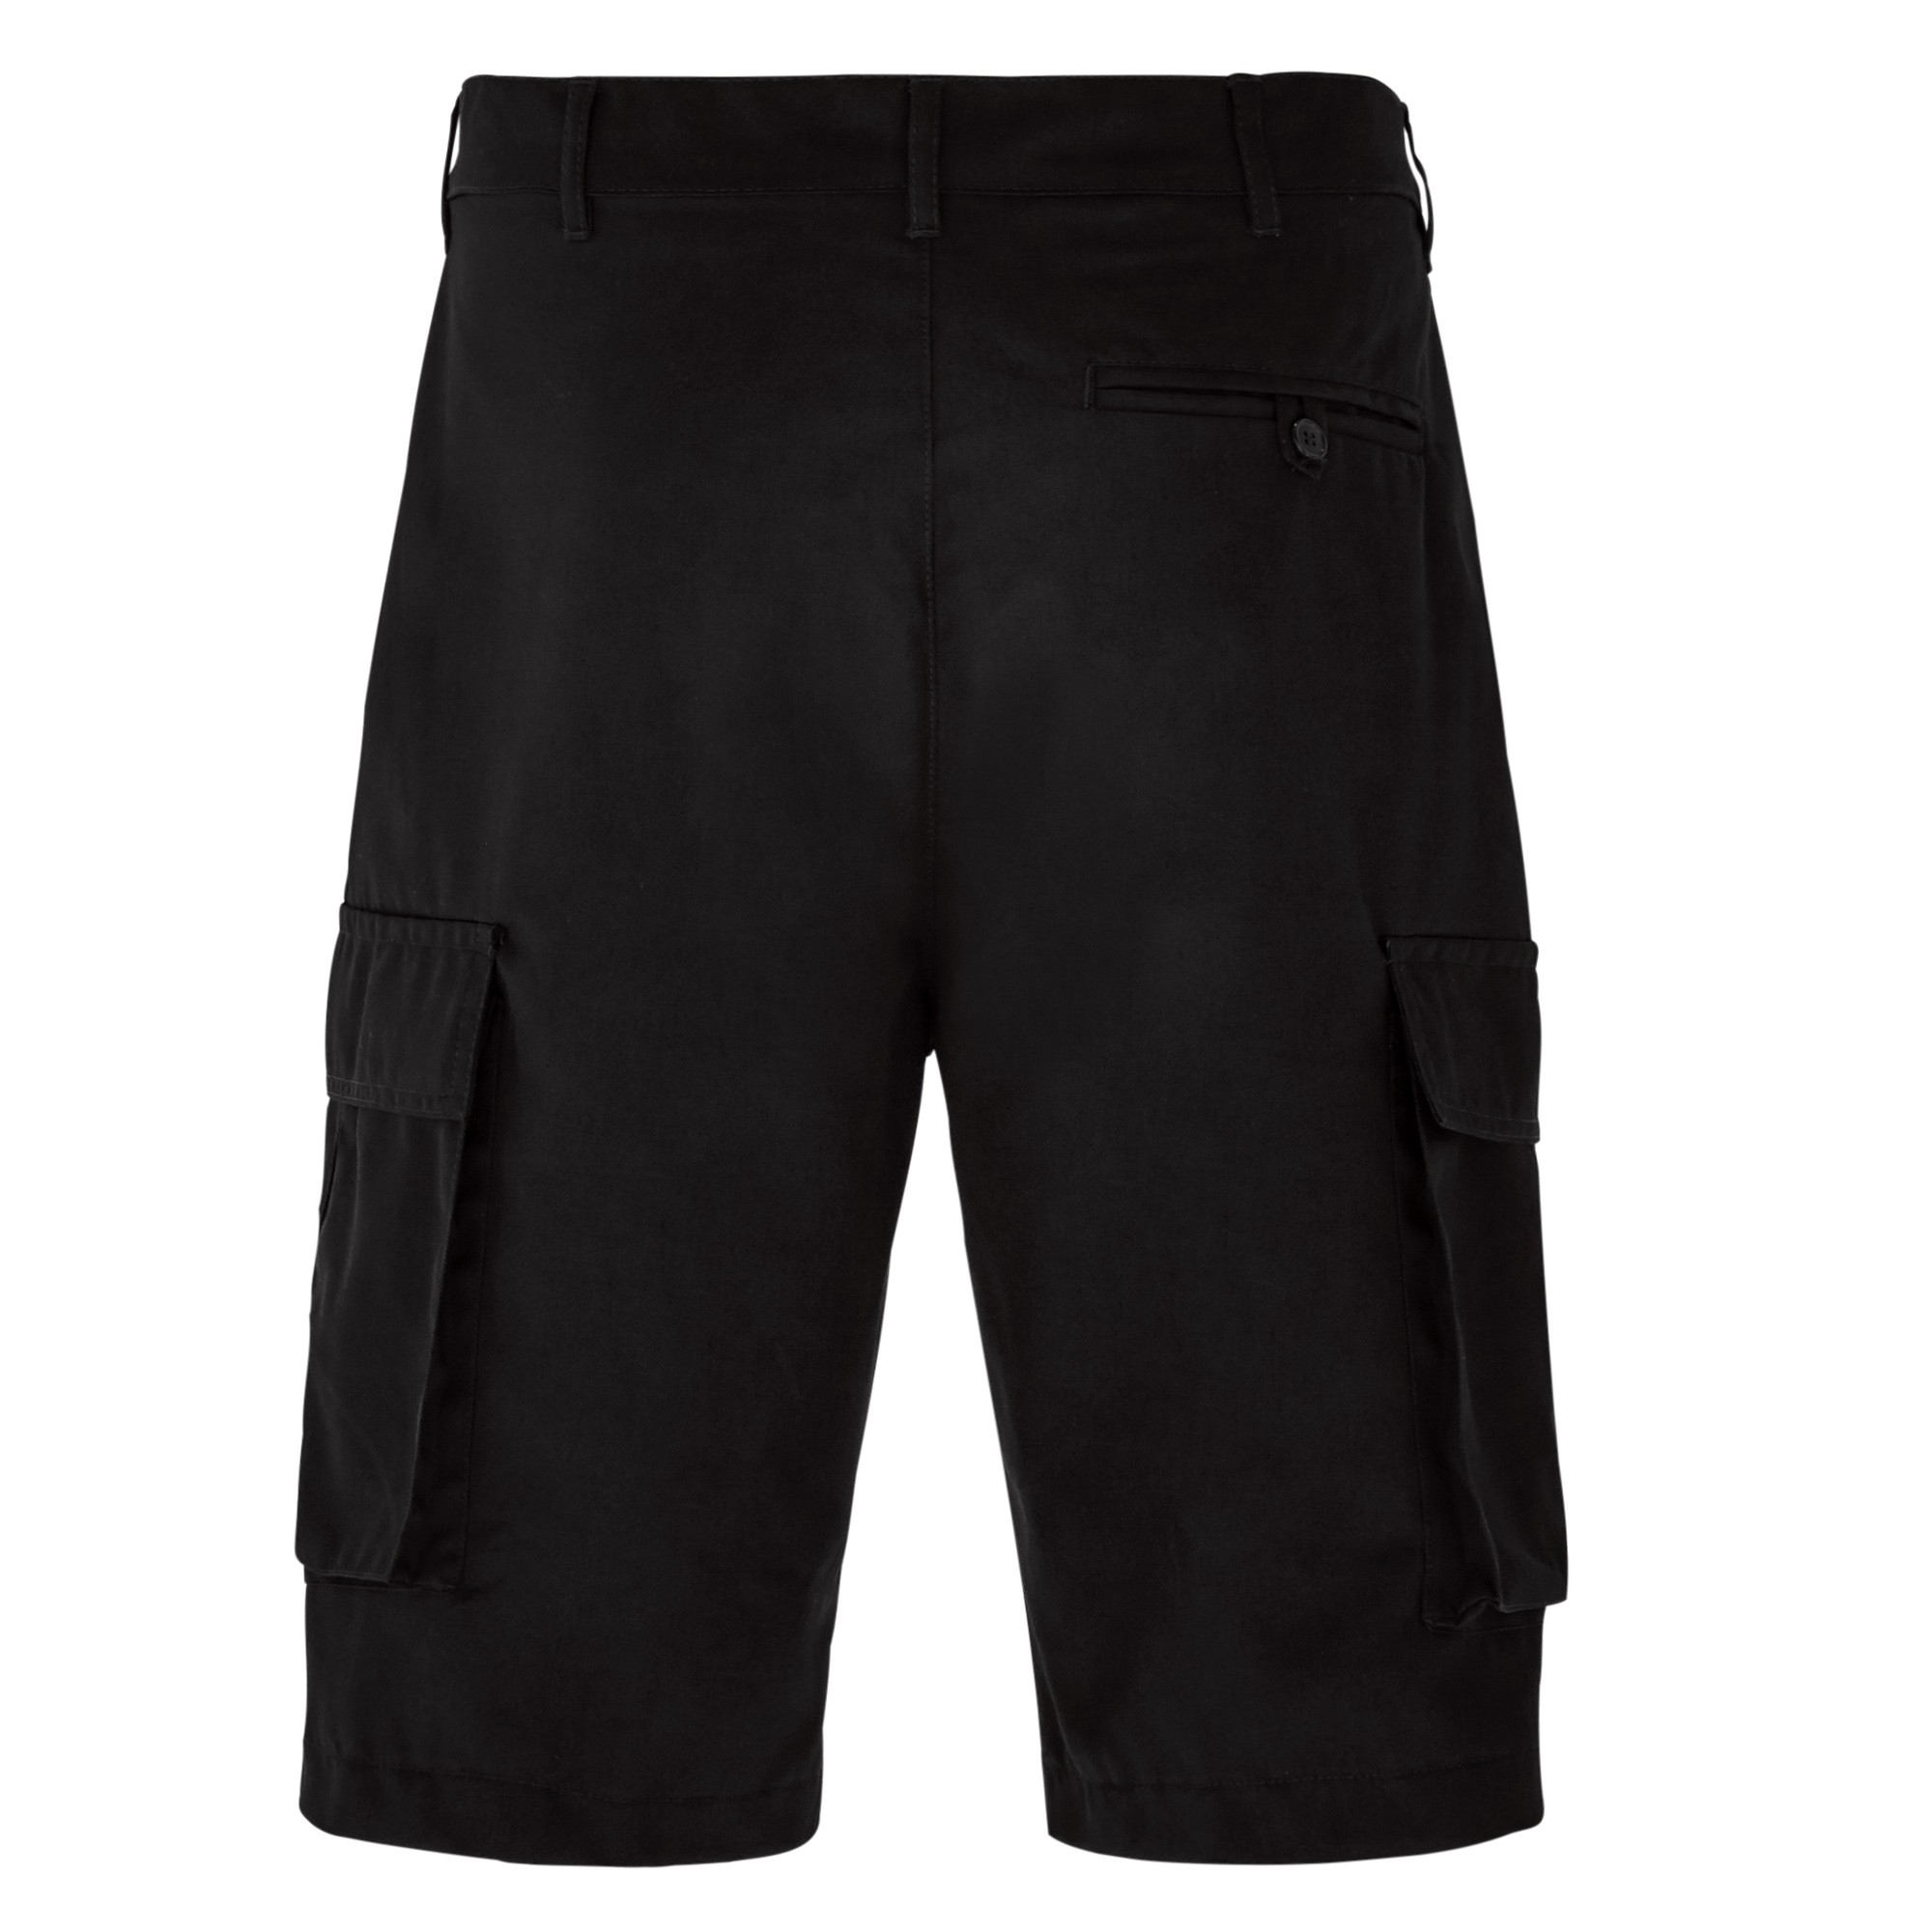 Cargo Shorts with Side Pouch Pockets, Black, Waist 40